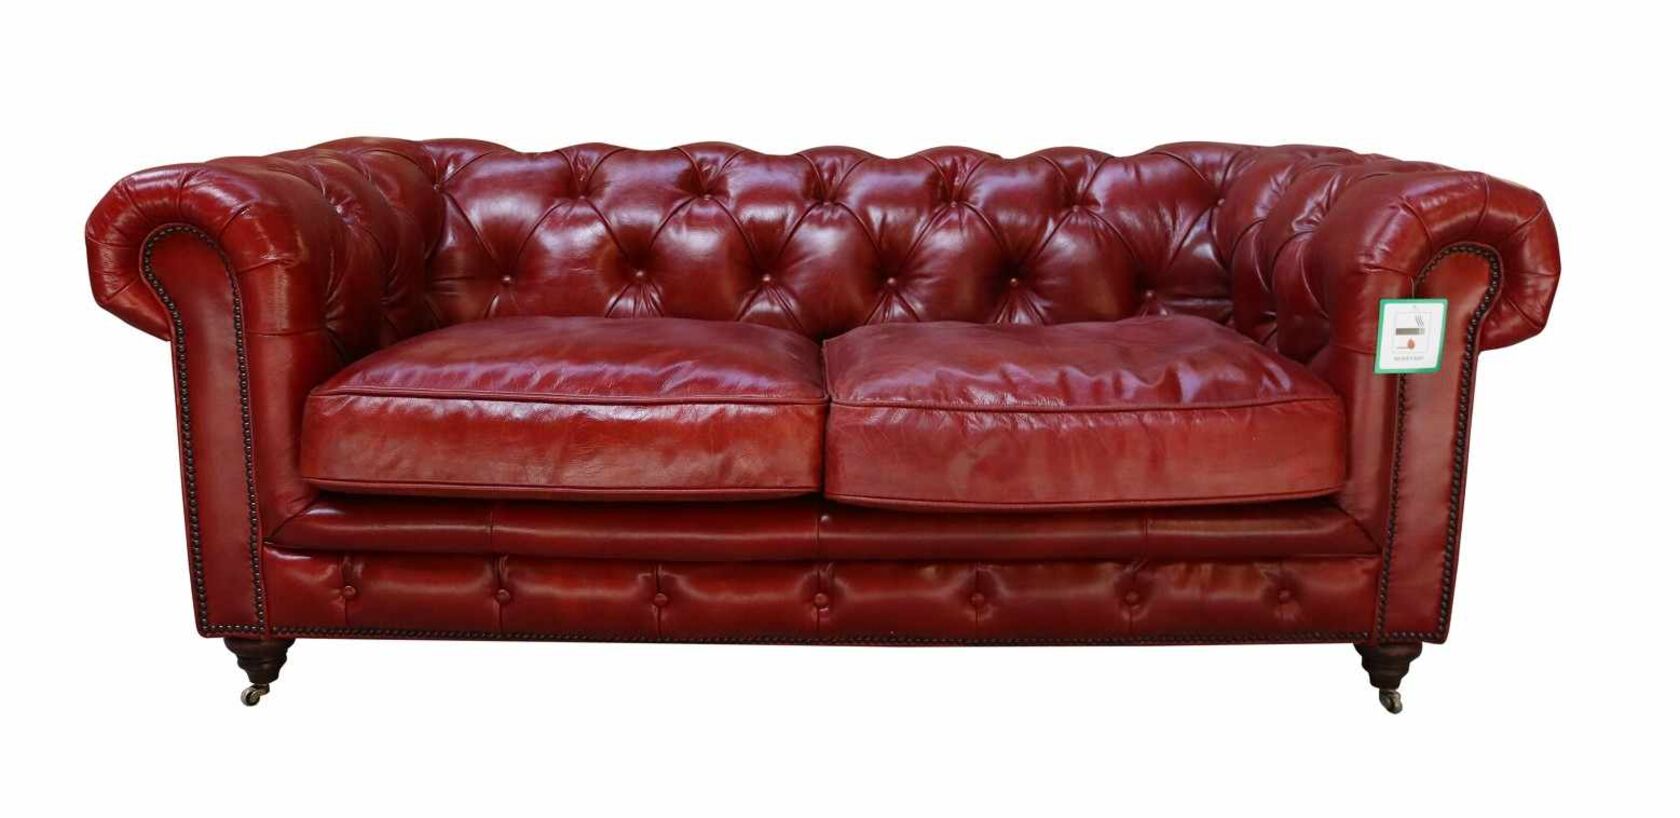 Vintage Distressed Chesterfield 2, Antique Style Leather Sofa